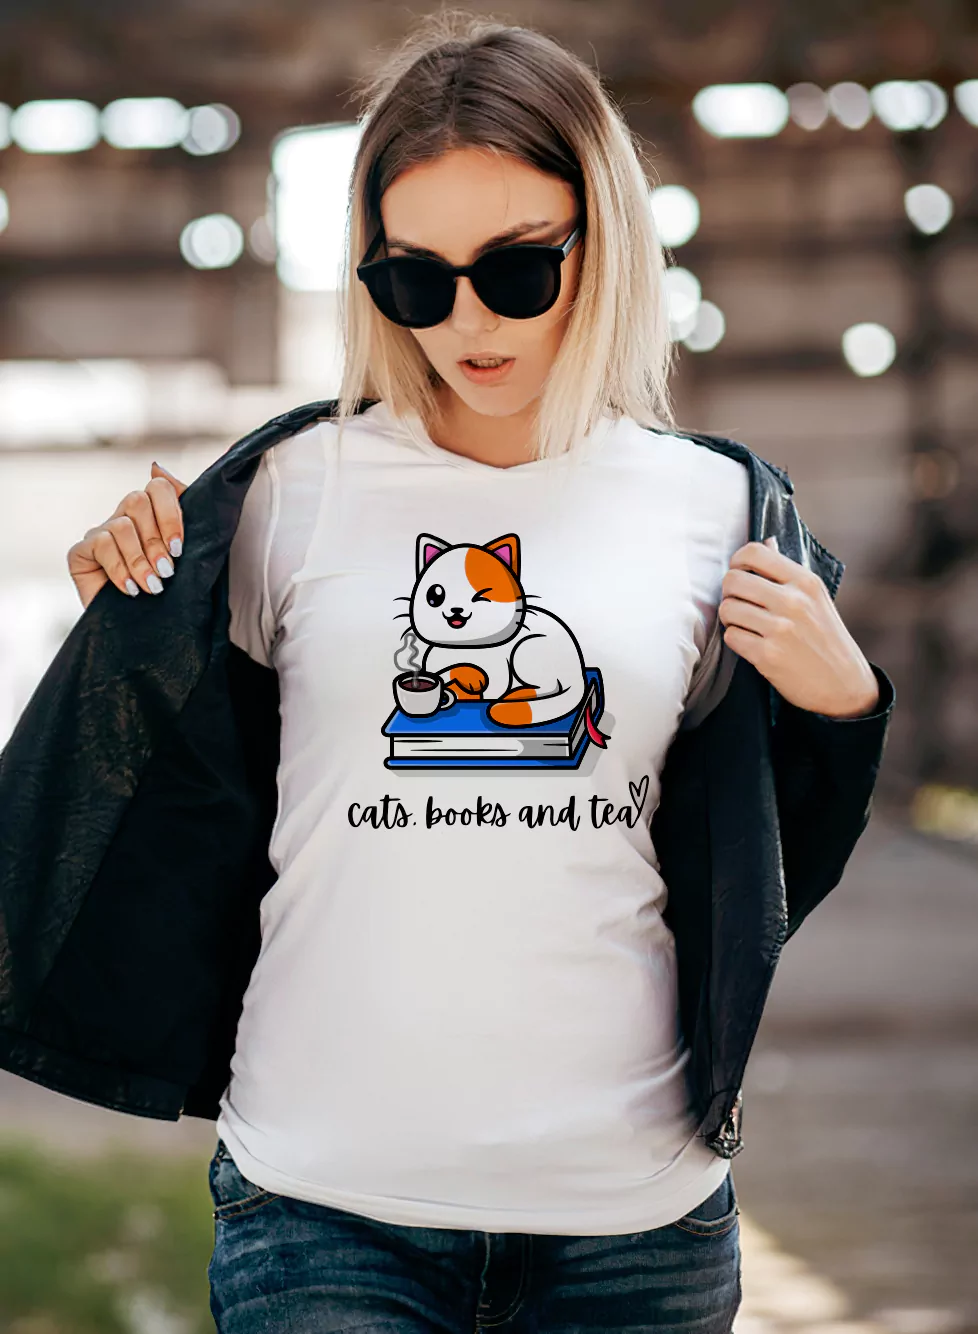 blond girl wearing Cats books and tea T-shirt